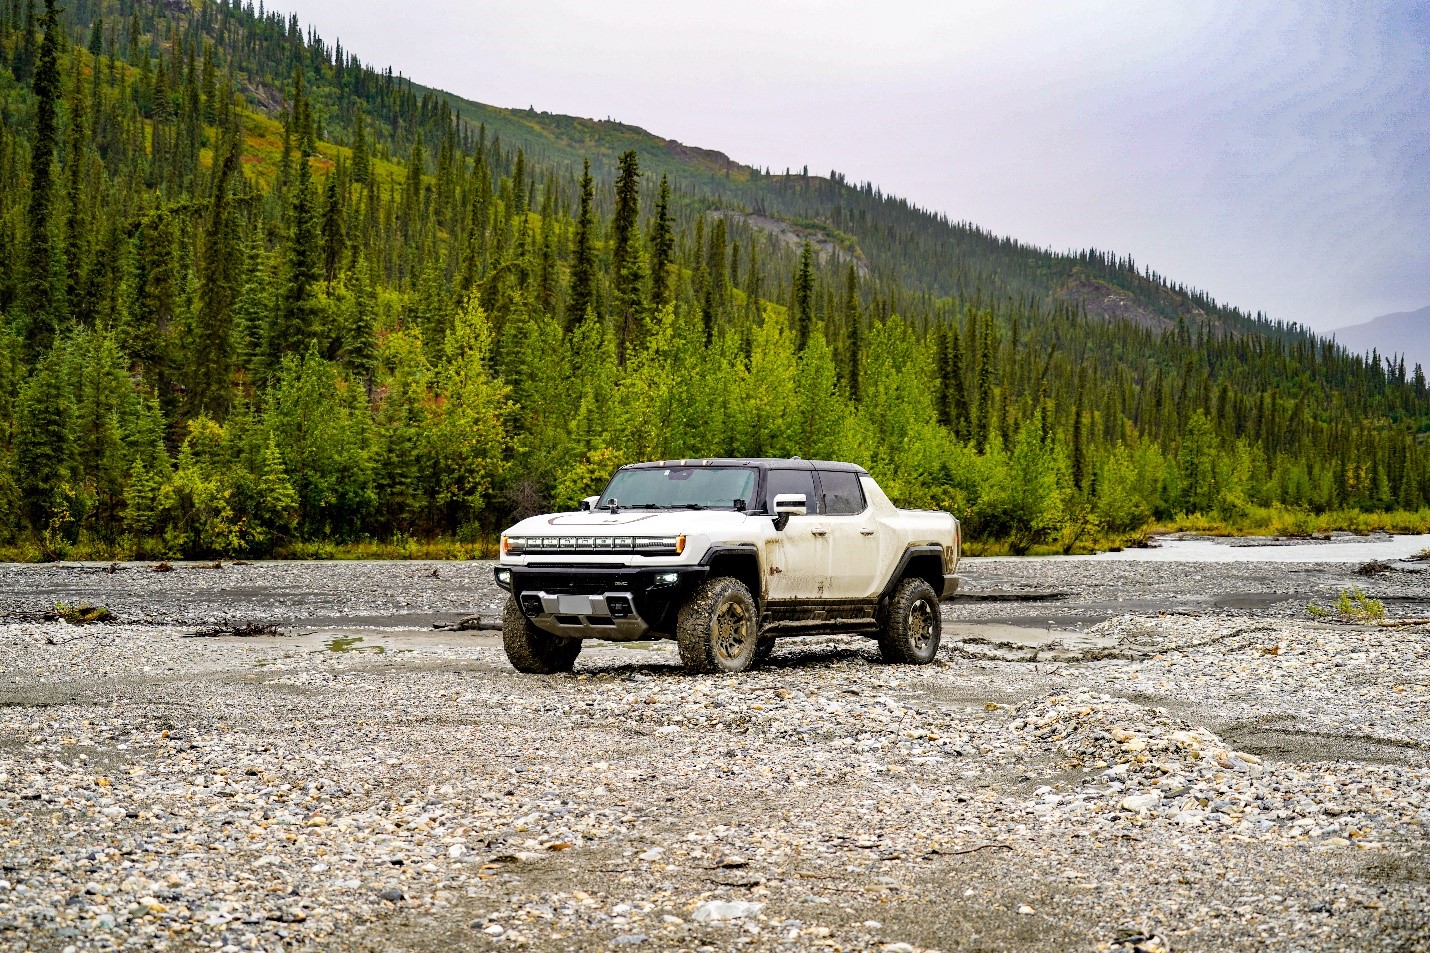 Hummer Electric Vehicle sits on a gravel bed along the Dalton Highway